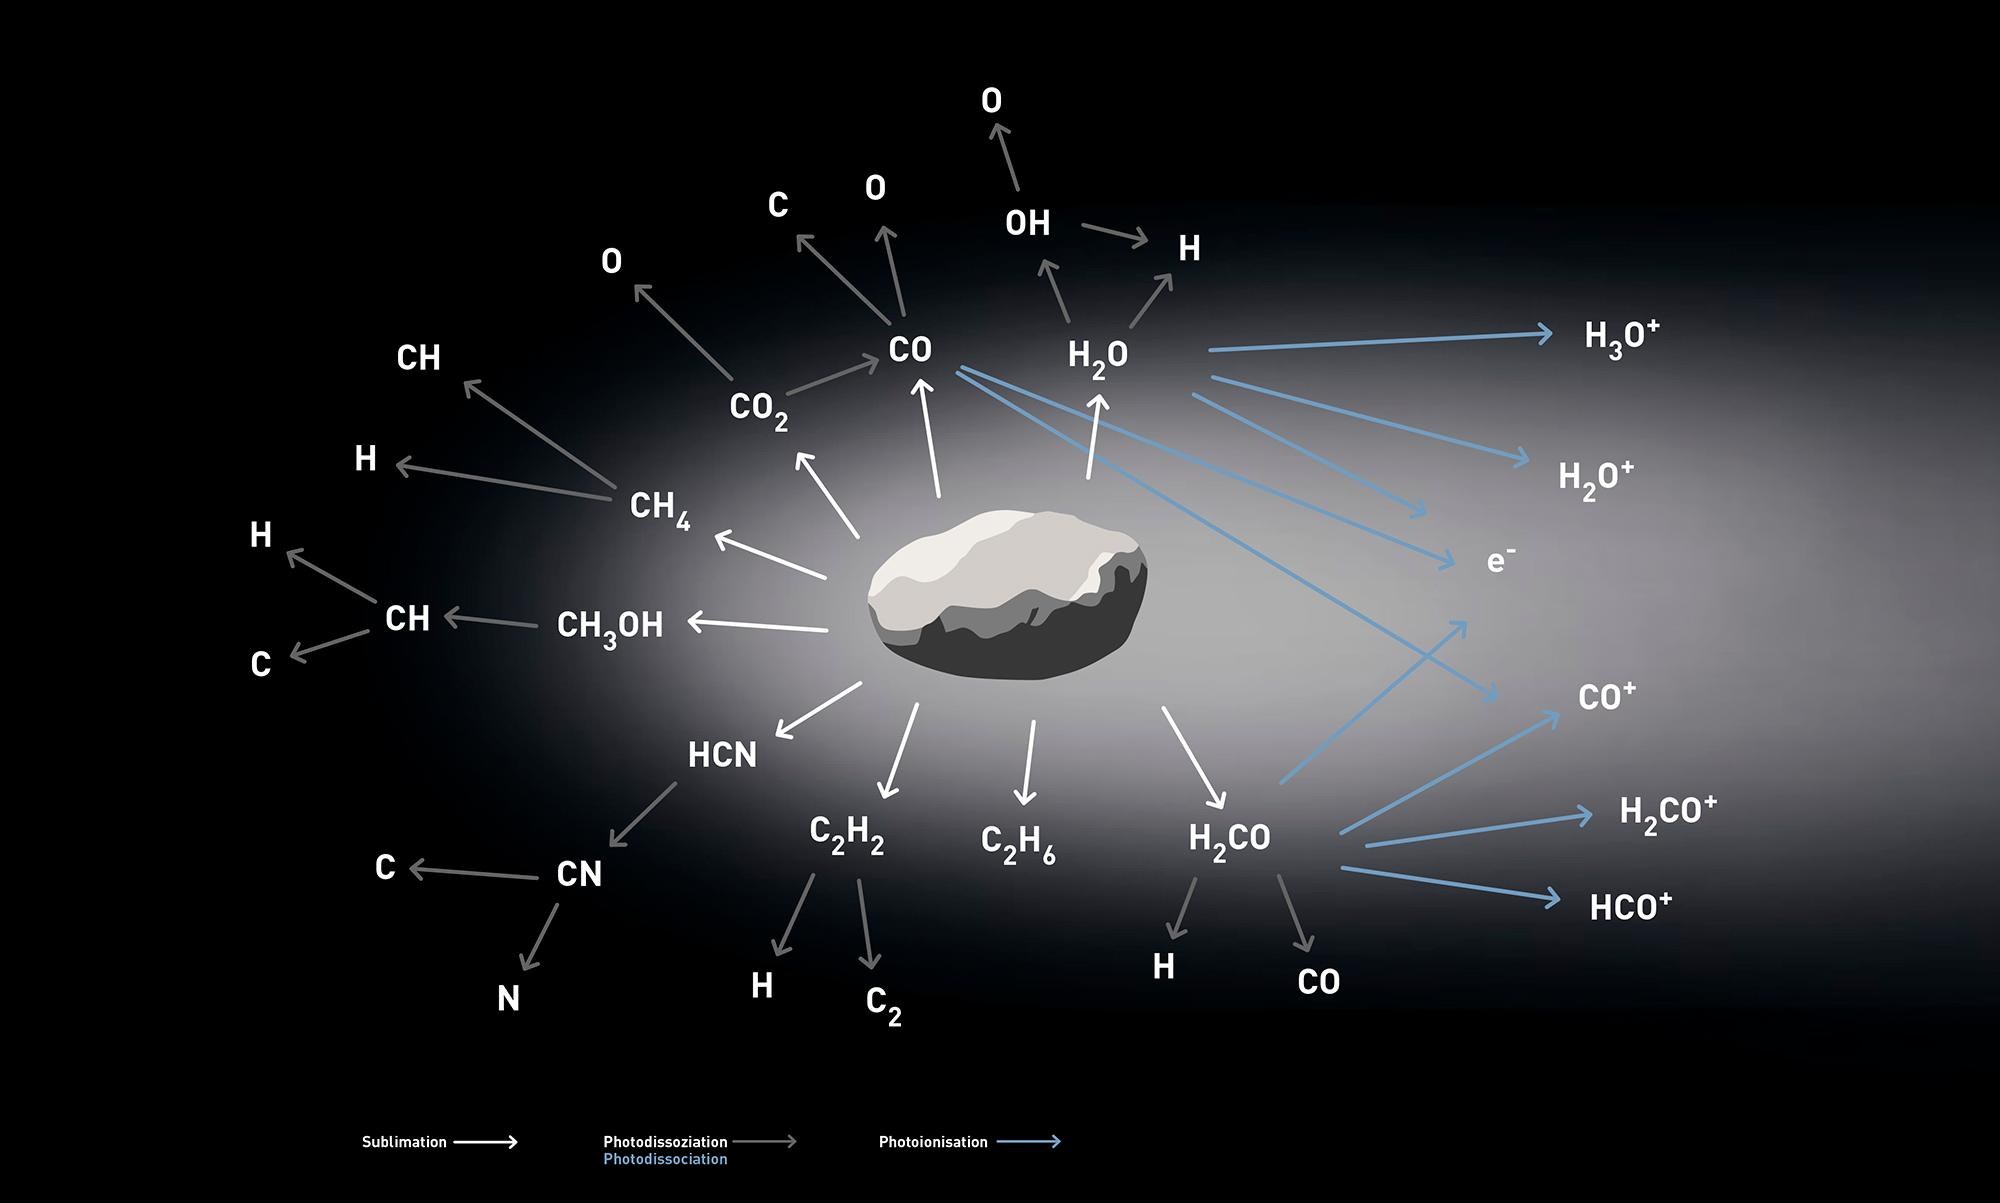 Sublimation, defining characteristic of comets